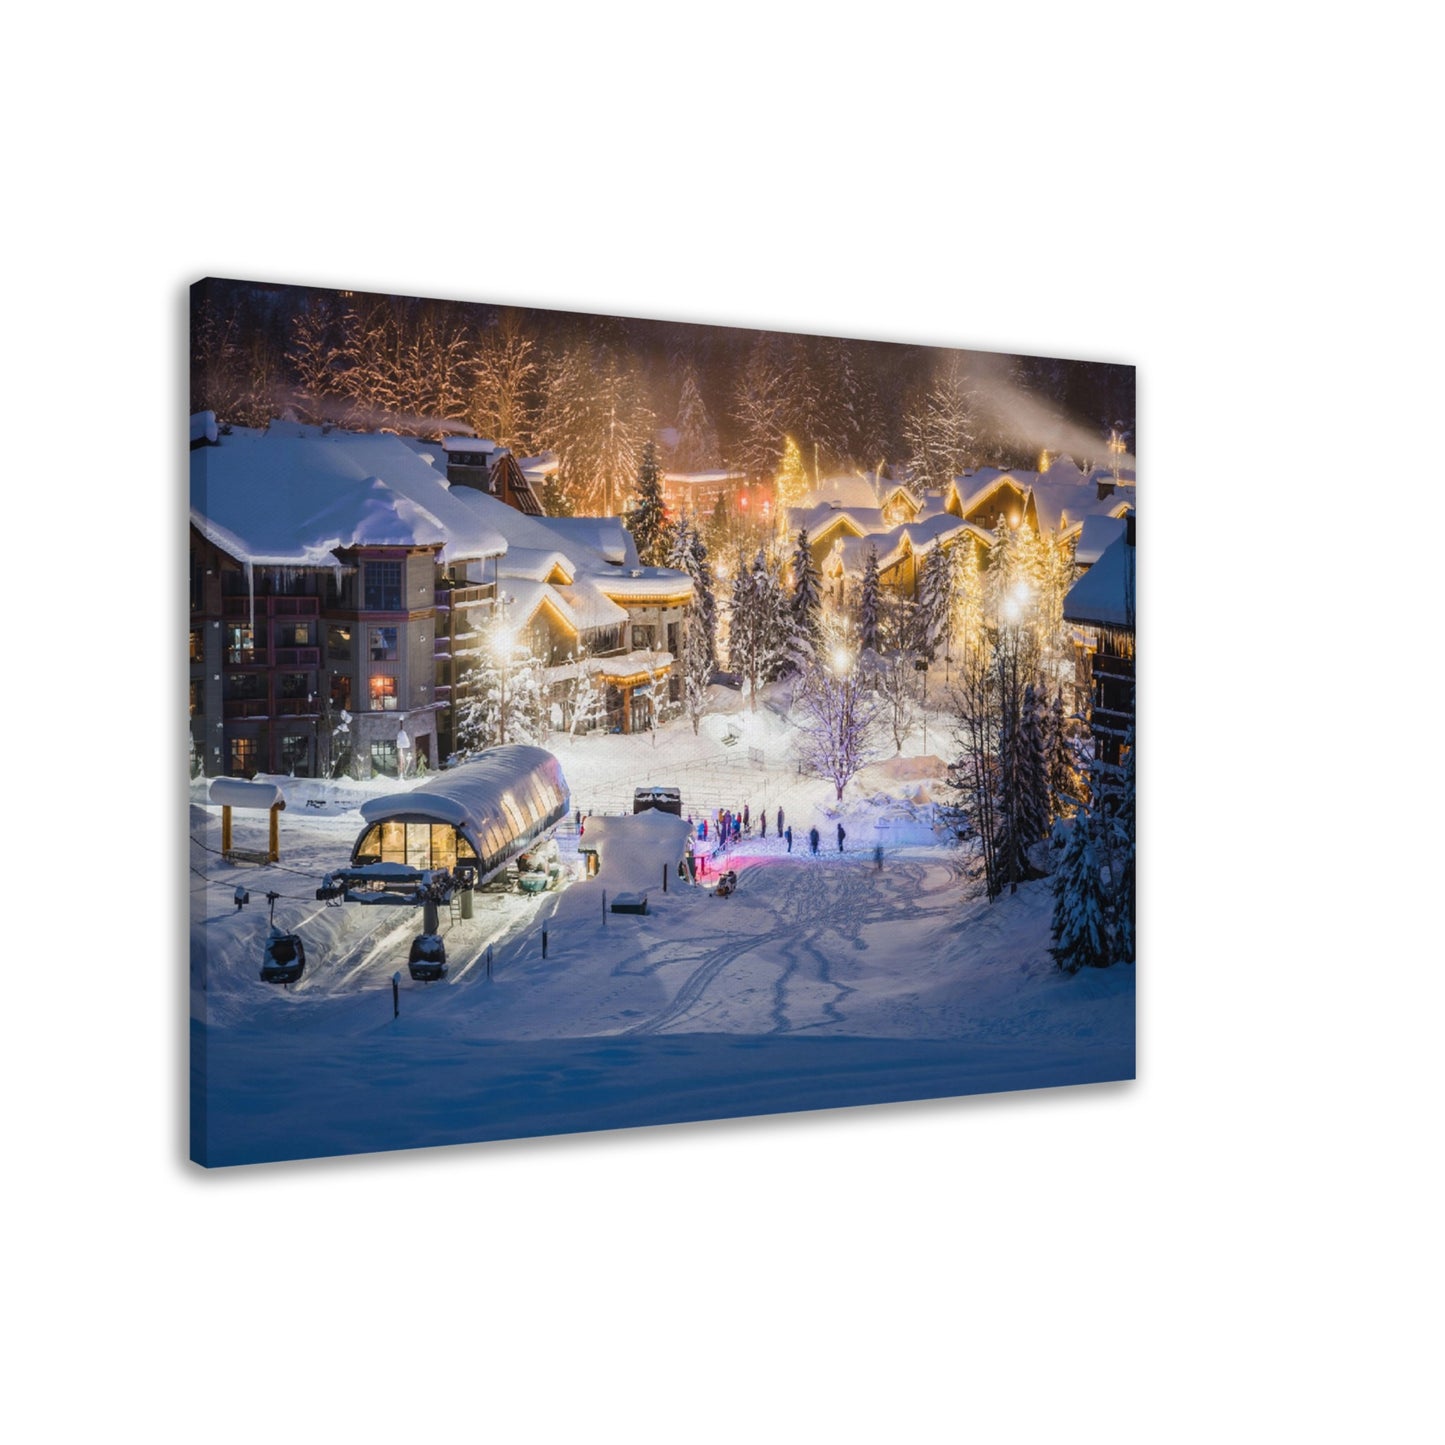 Whistler Creekside Village and Gondola - Early Morning View - Canvas Print - Whistler Blackcomb, British Columbia, Canada